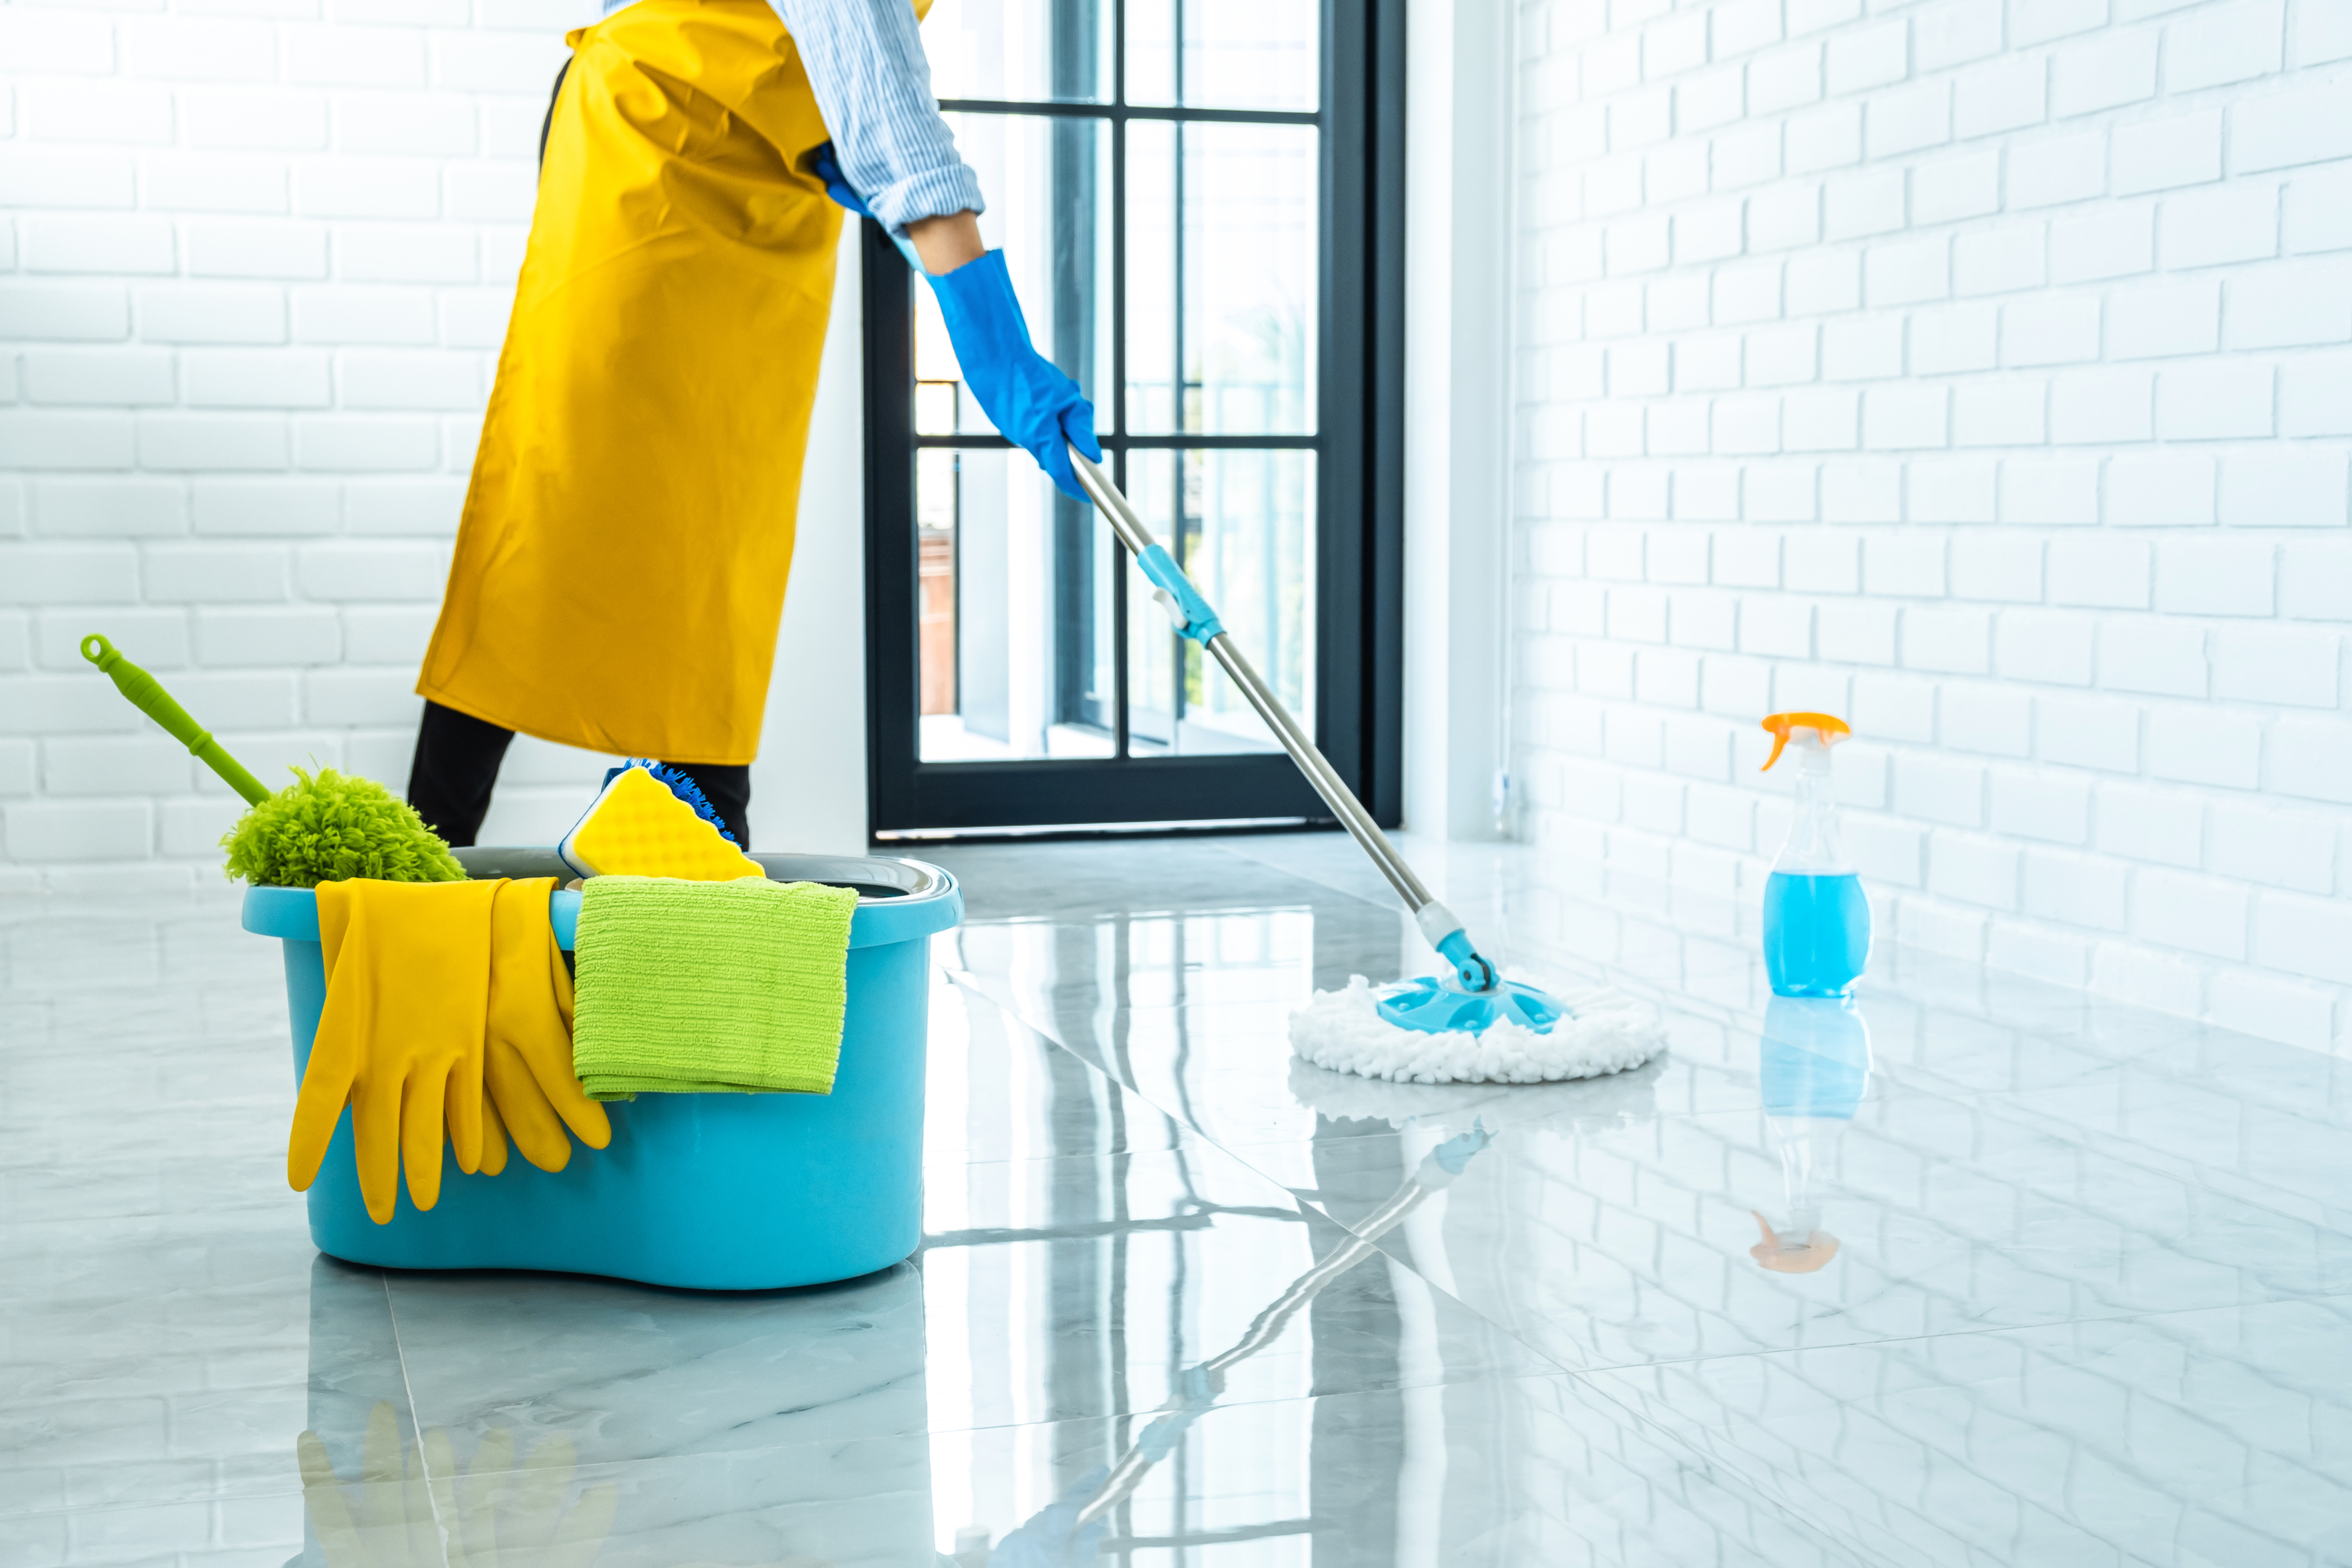 A thorough disinfection of the floor and surfaces should be practised to reduce the viral load.